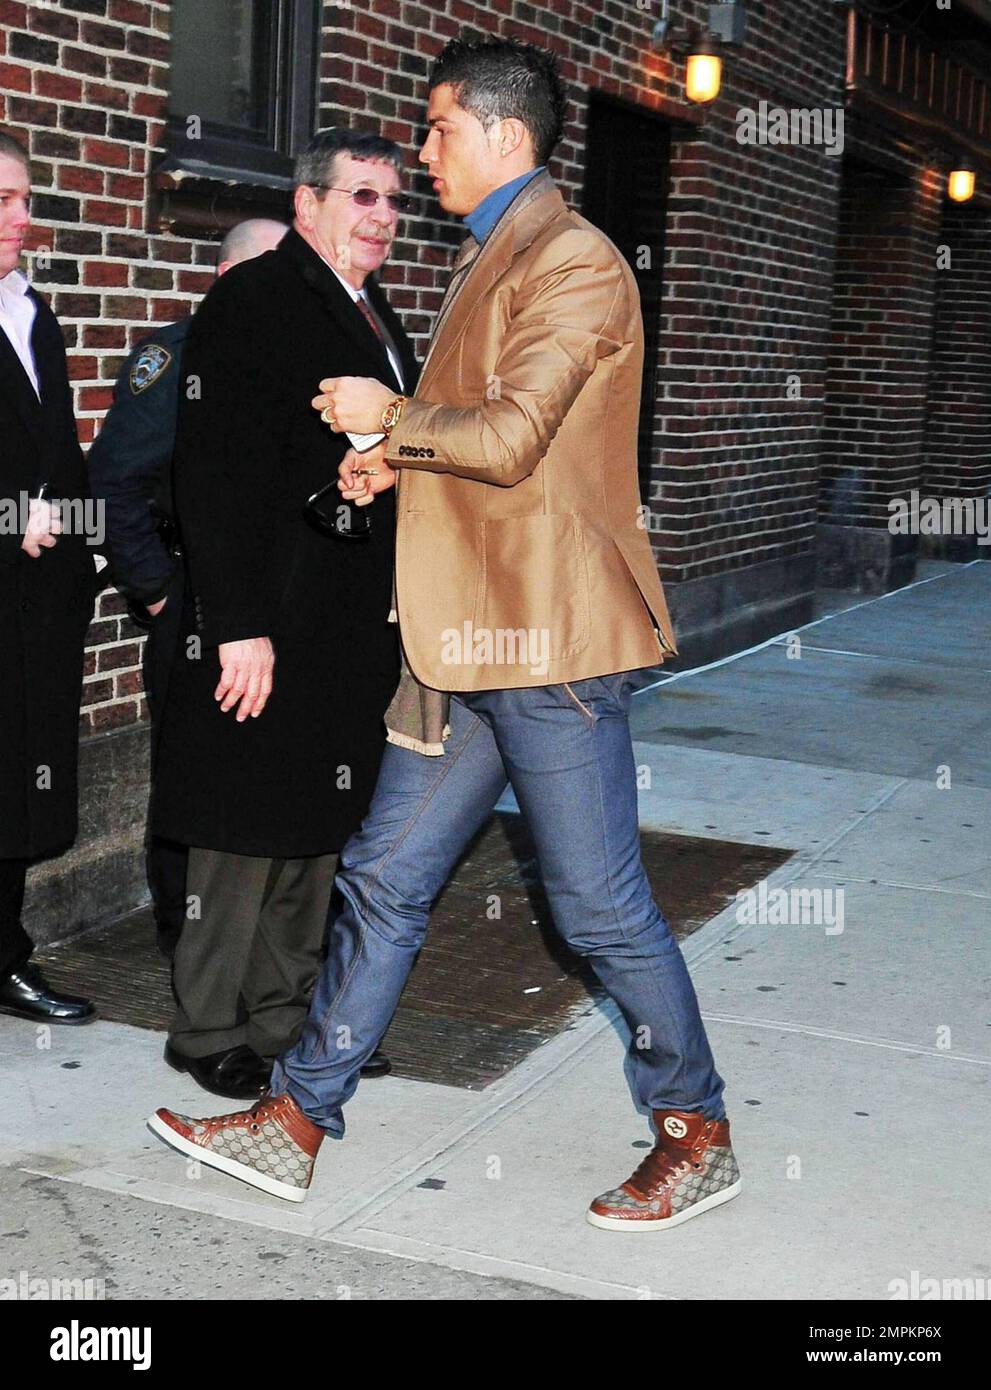 Portuguese footballer Cristiano Ronaldo, who wore Gucci hightop sneakers,  arrives at The Ed Sullivan Theater following his girlfriend, Sports  Illustrated Swimsuit Edition cover model Irina Shayk before she appeared on  "Late Show